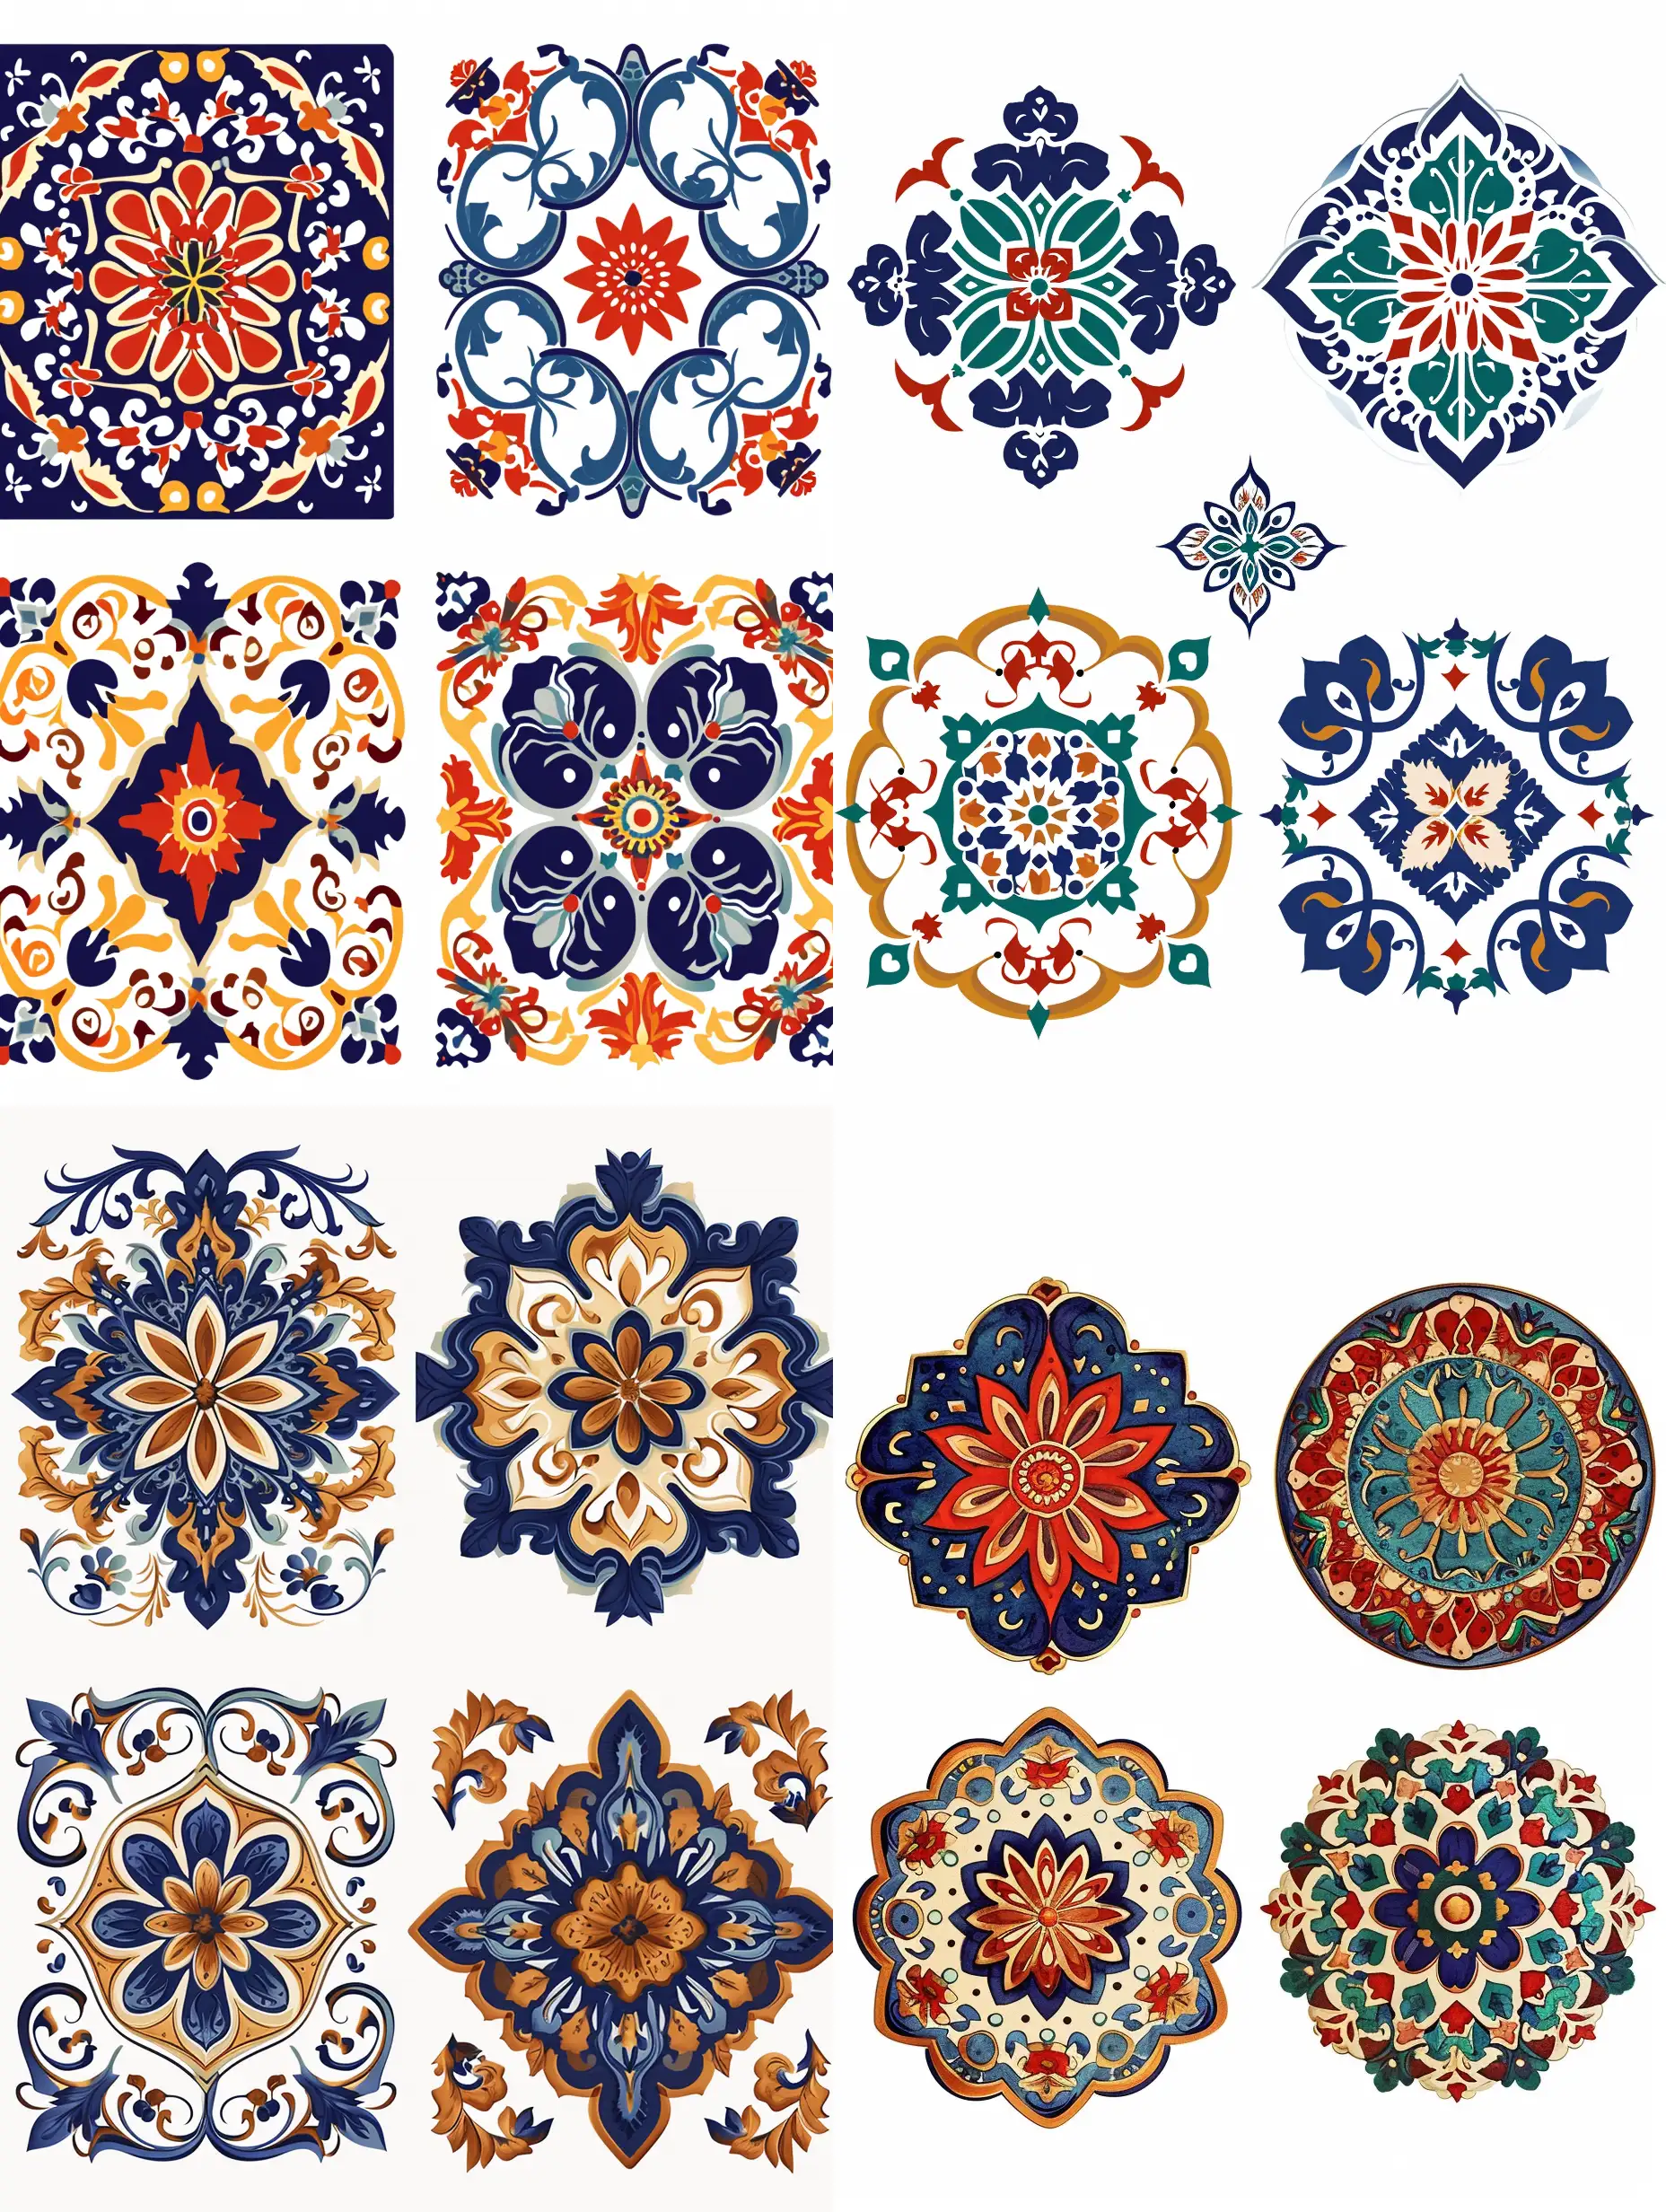 Variations-of-Ancient-Ornament-Patterns-on-White-Background